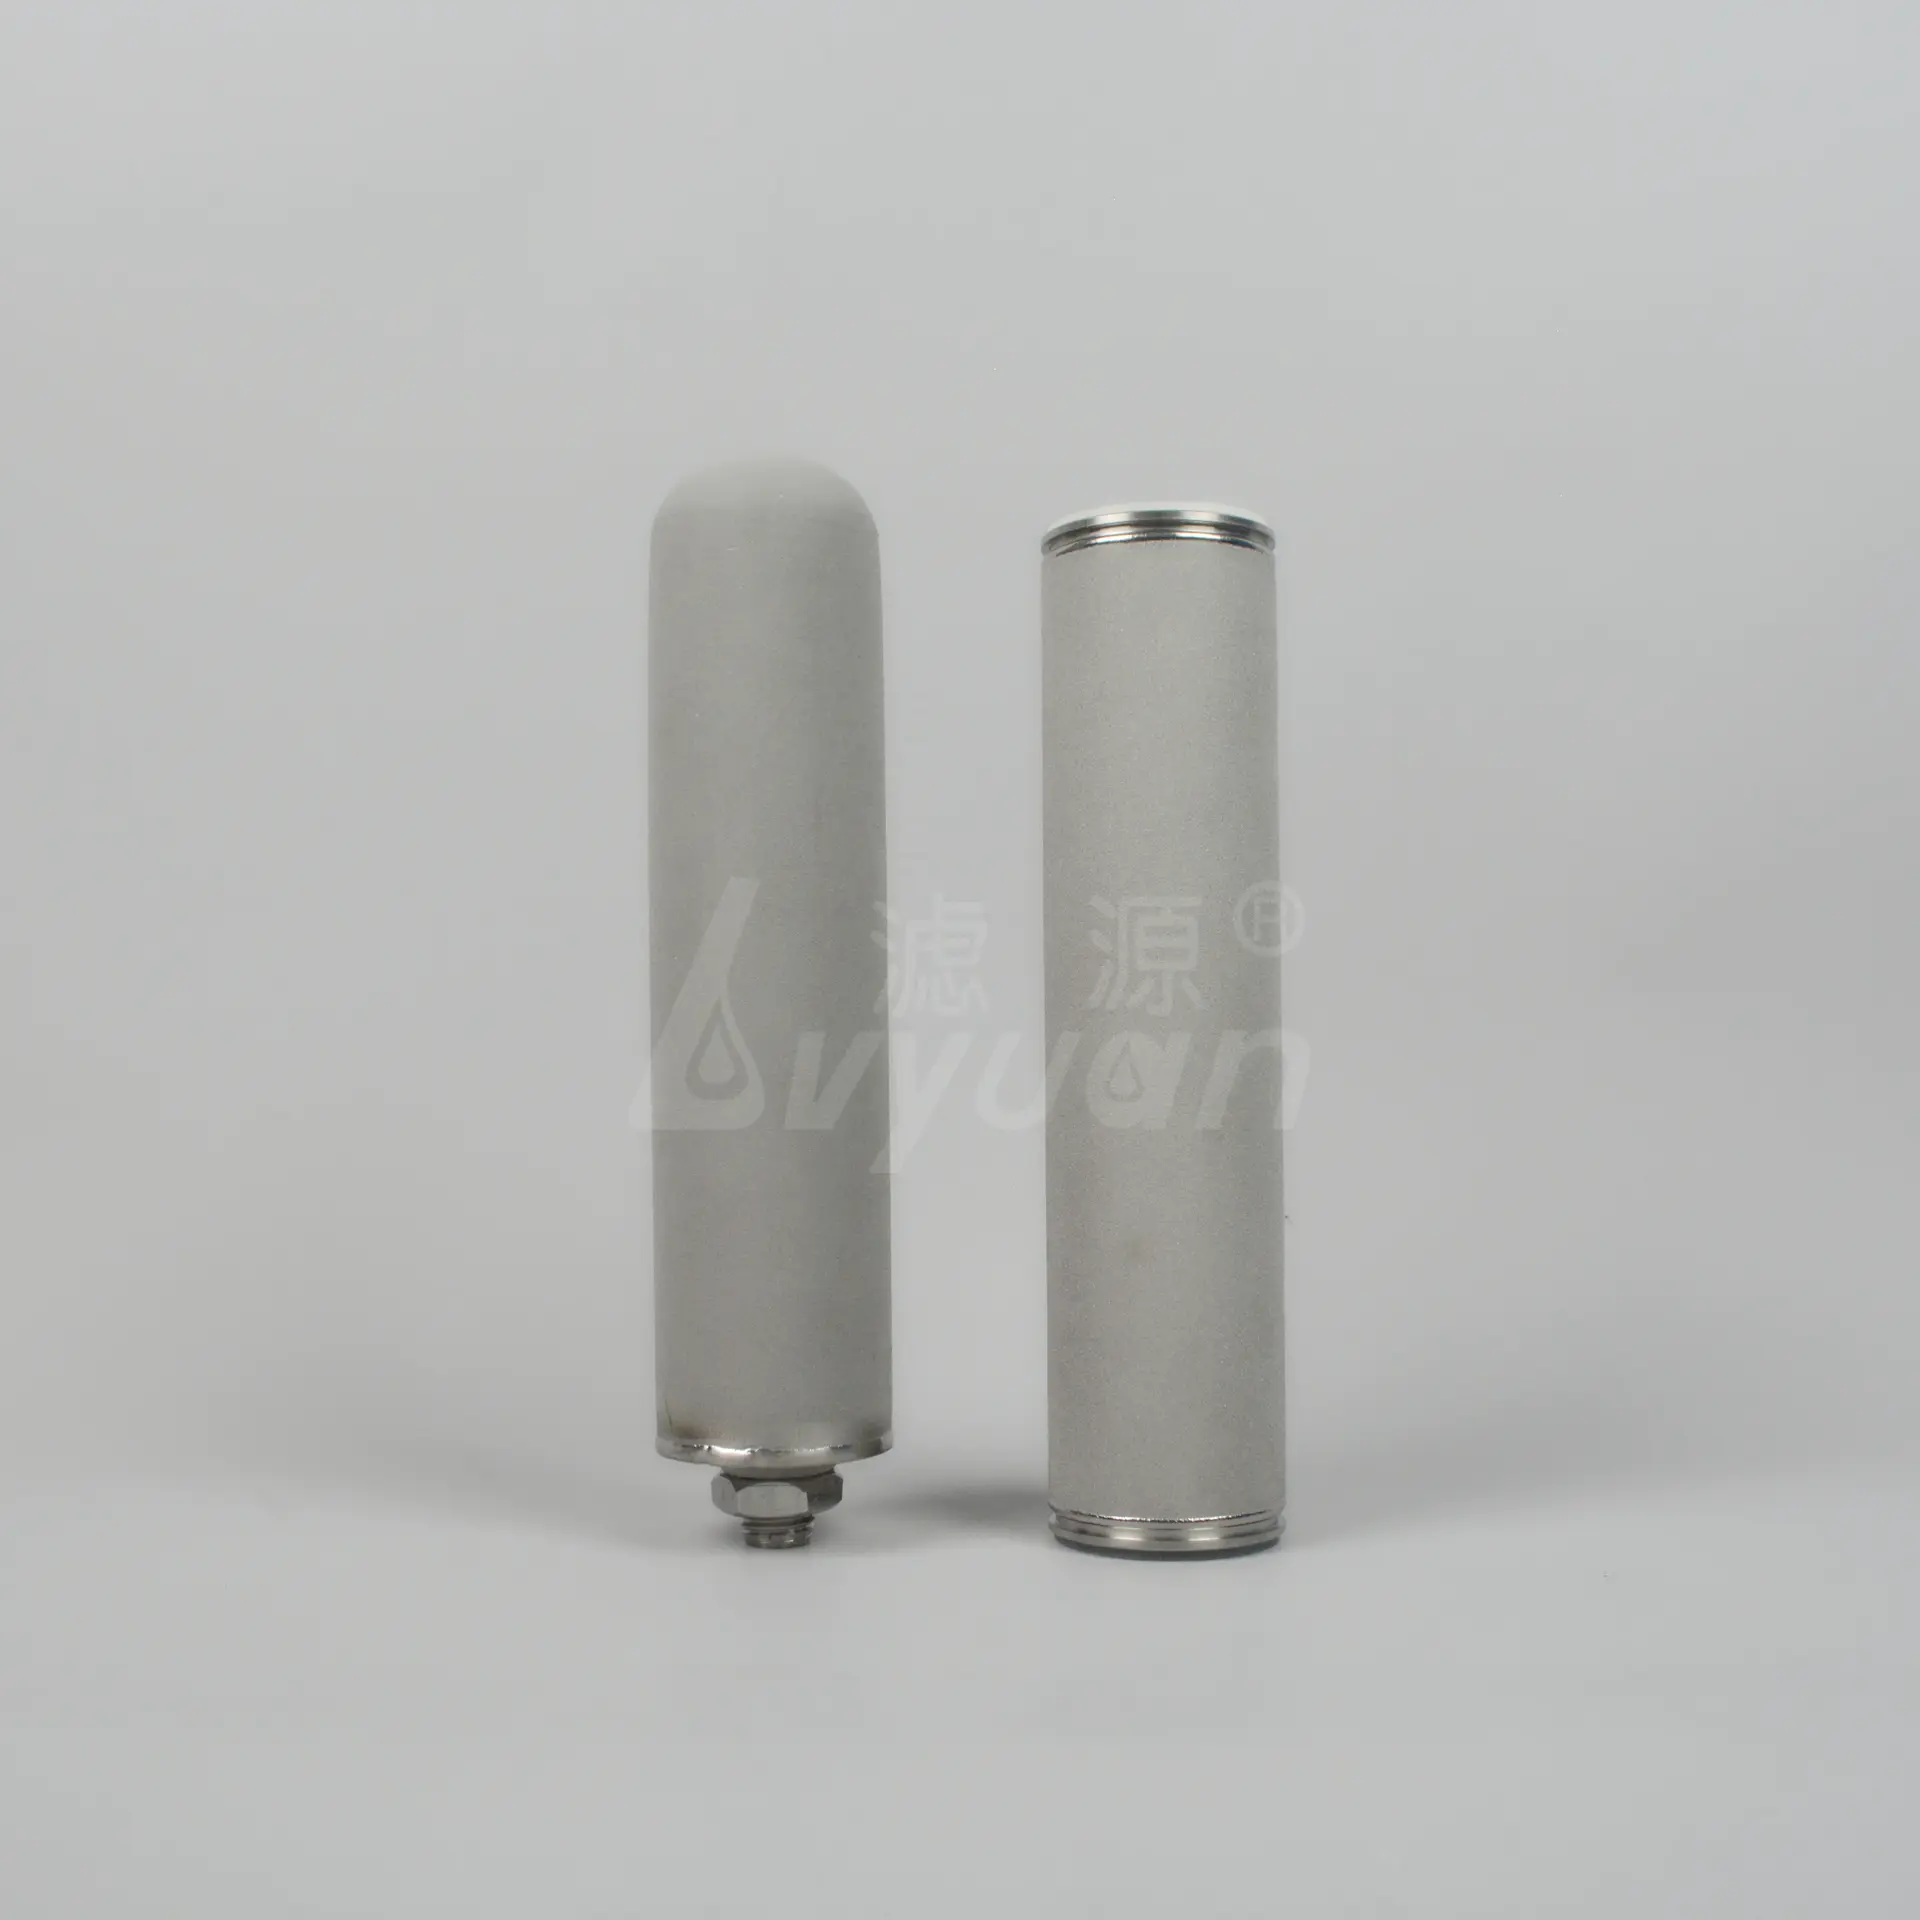 200 micron sintered titanium water filter cartridge for industrial water filtration